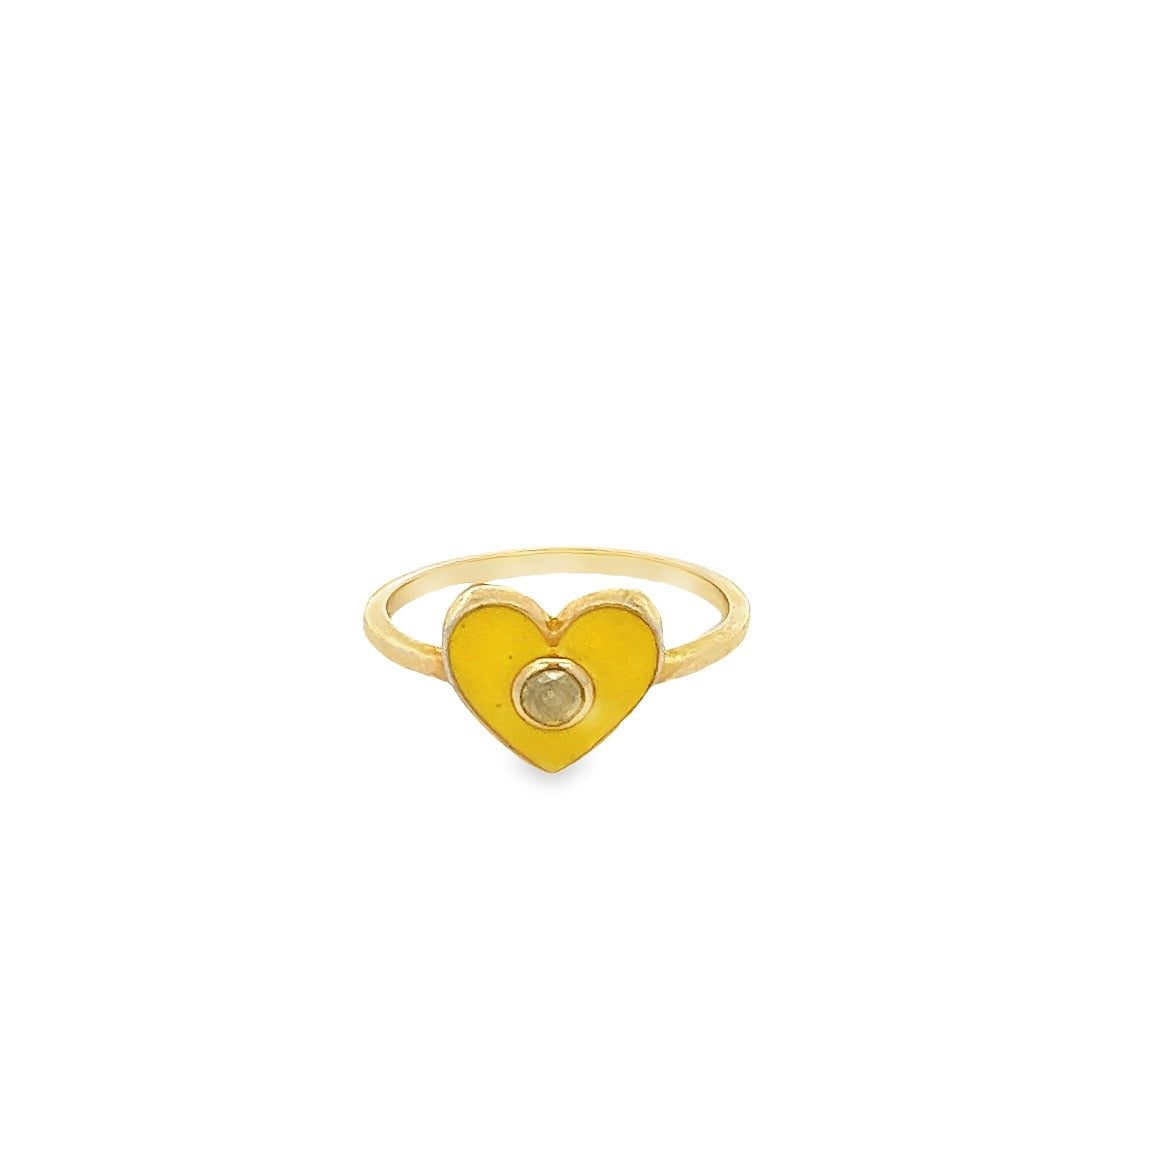 925 SILVER GOLD PLATED YELLOW ENAMEL HEART RING